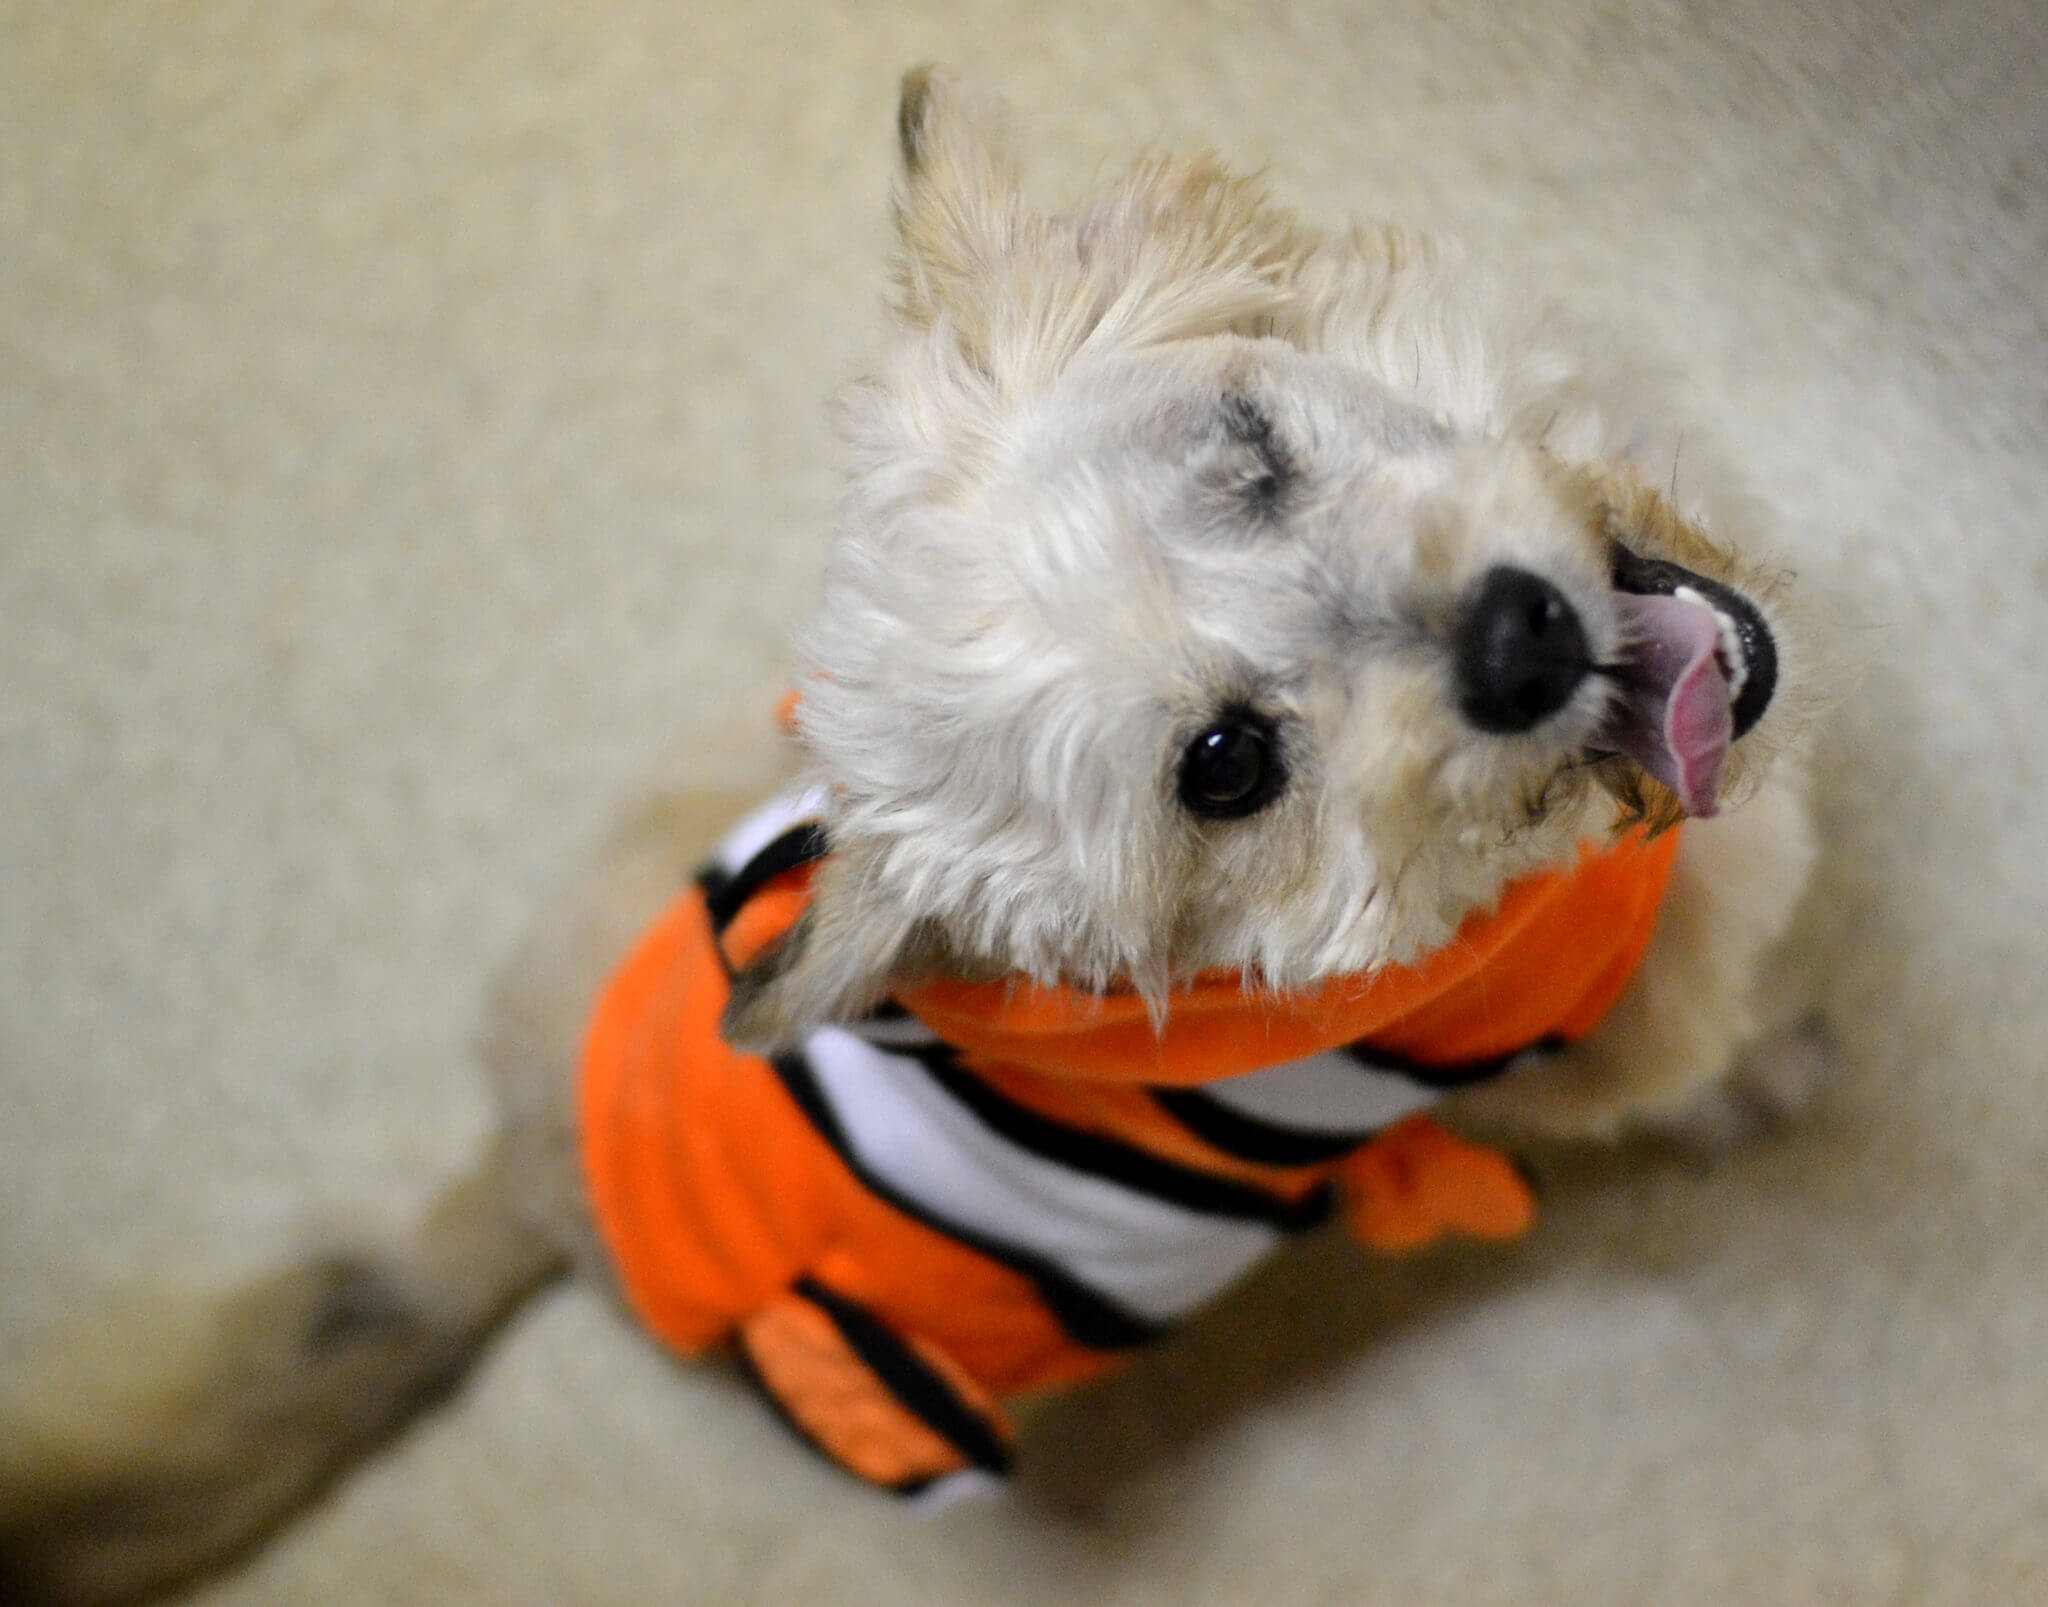 Rueben the one year old terrier mix may only have one eye but he still makes an adorable clownfish!